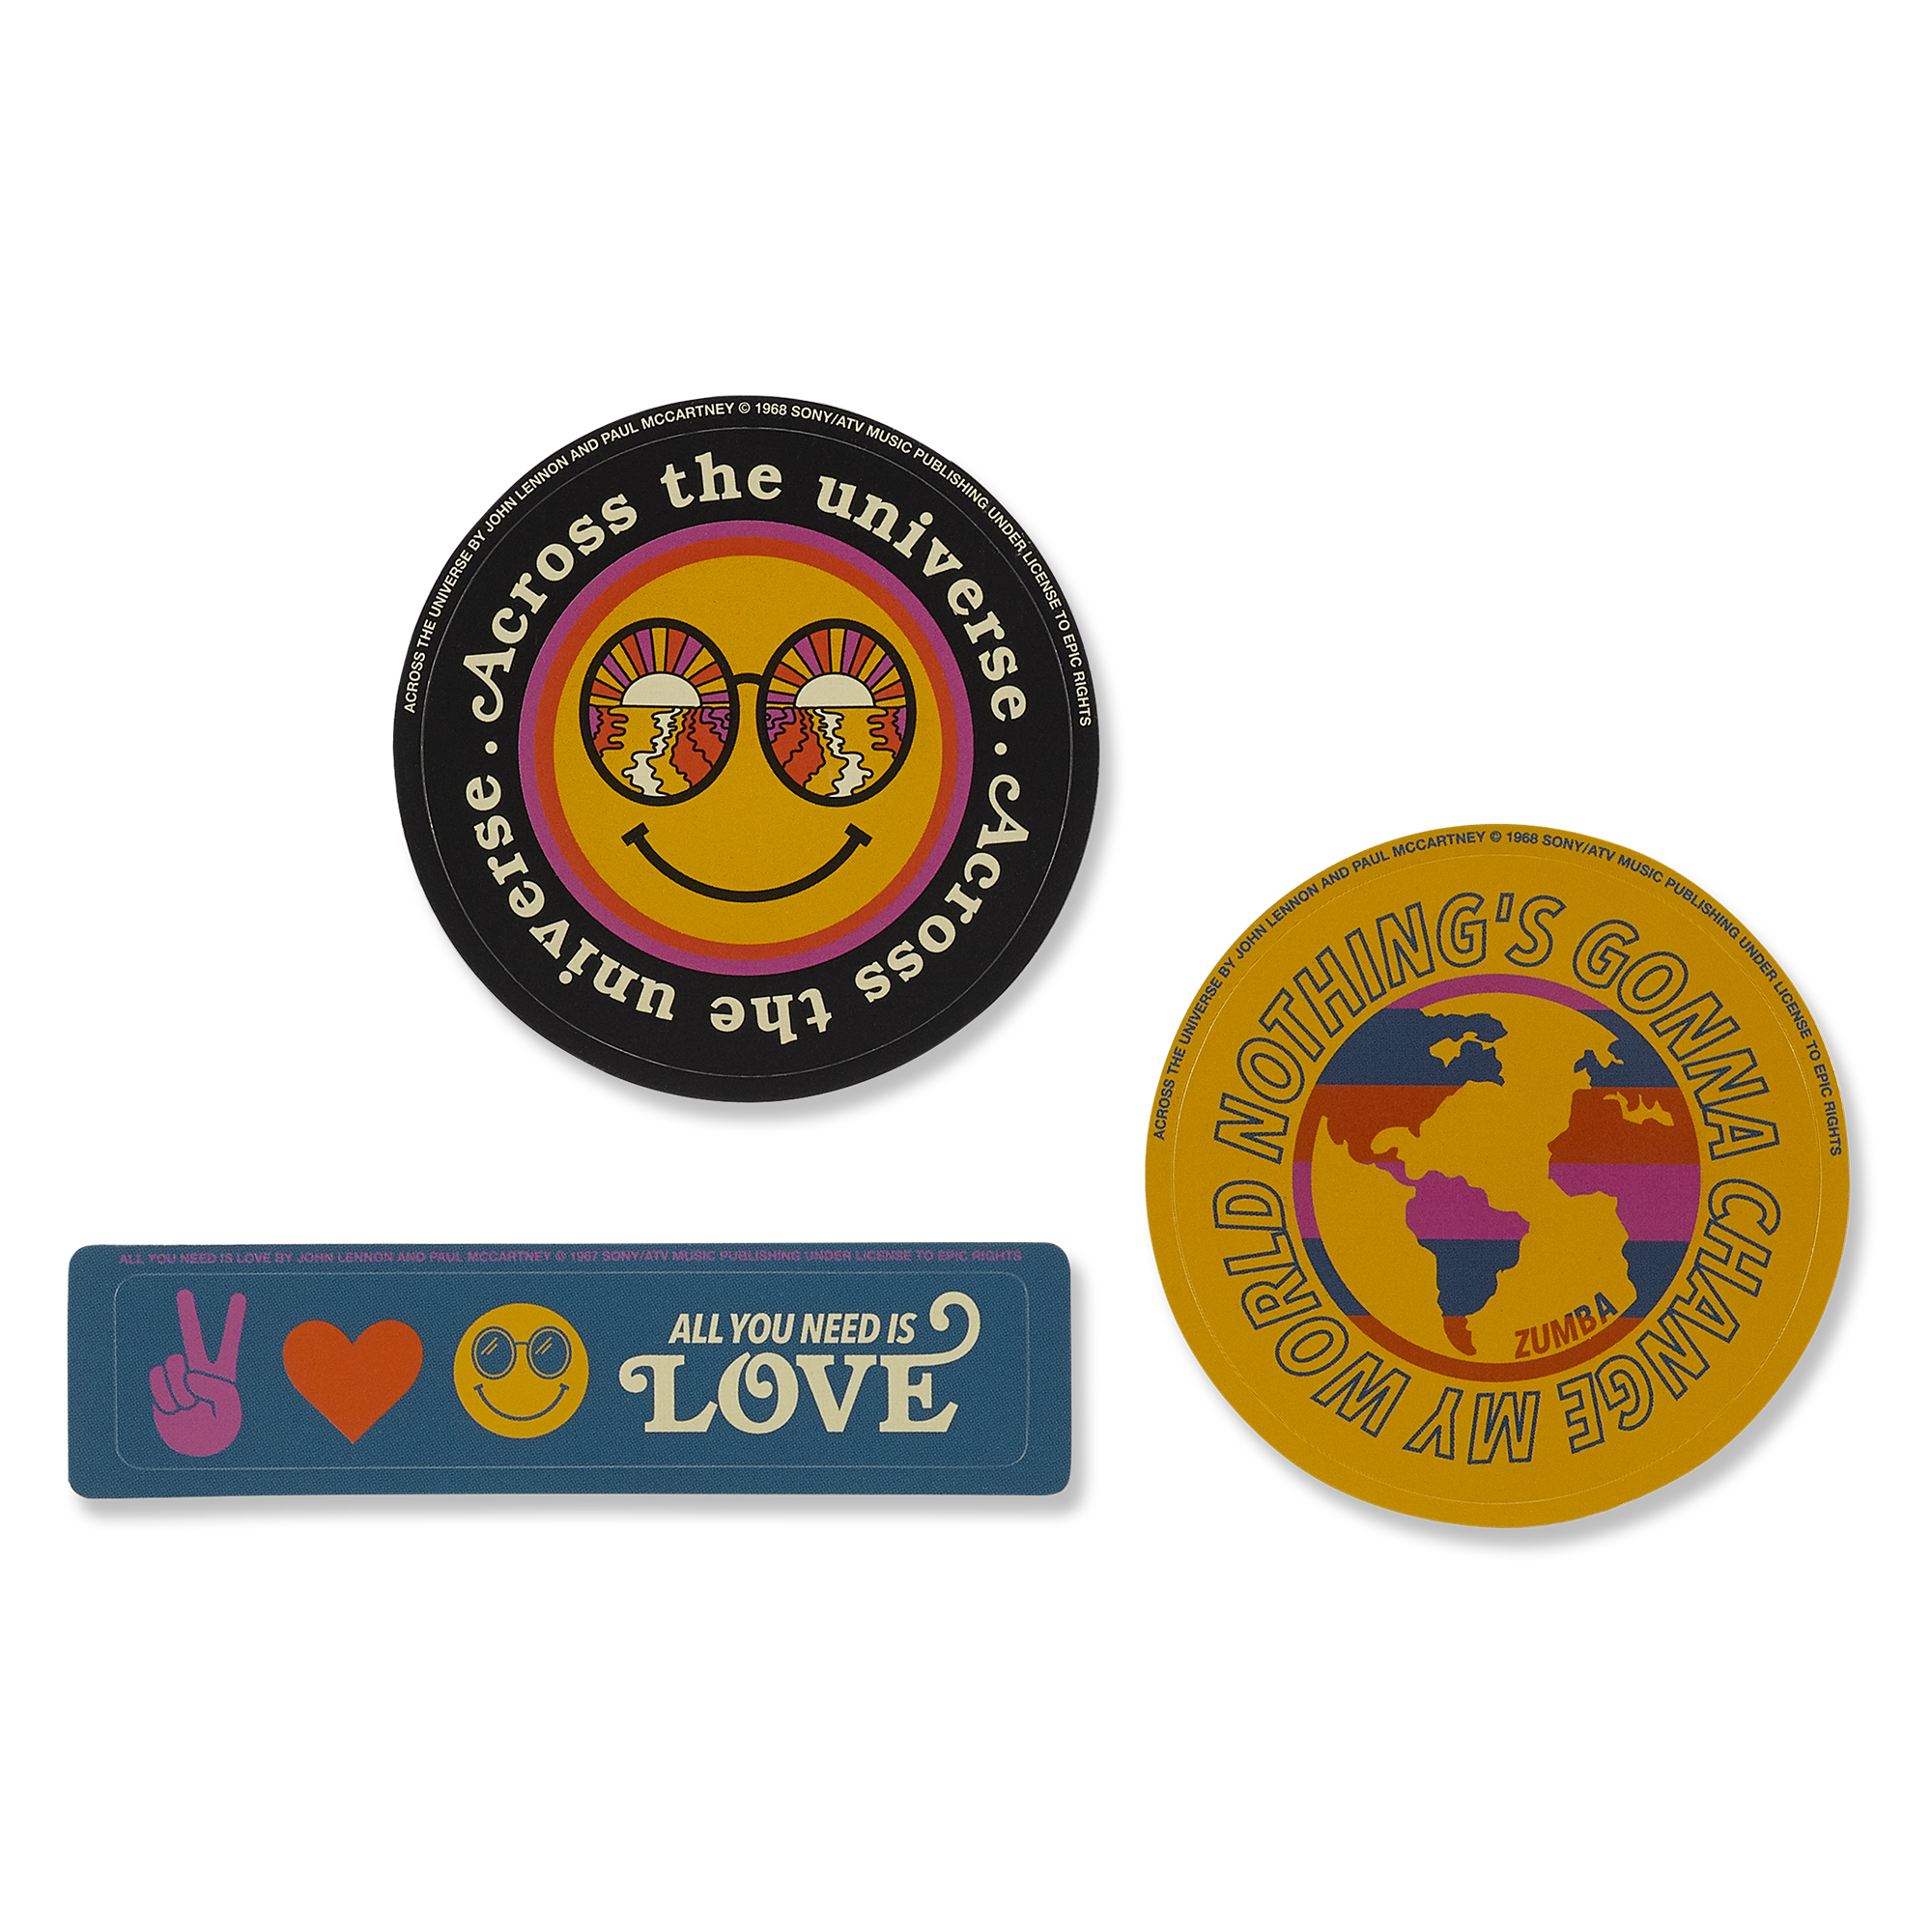 All You Need Is Love Stickers 3PK - Zumba Shop SEA